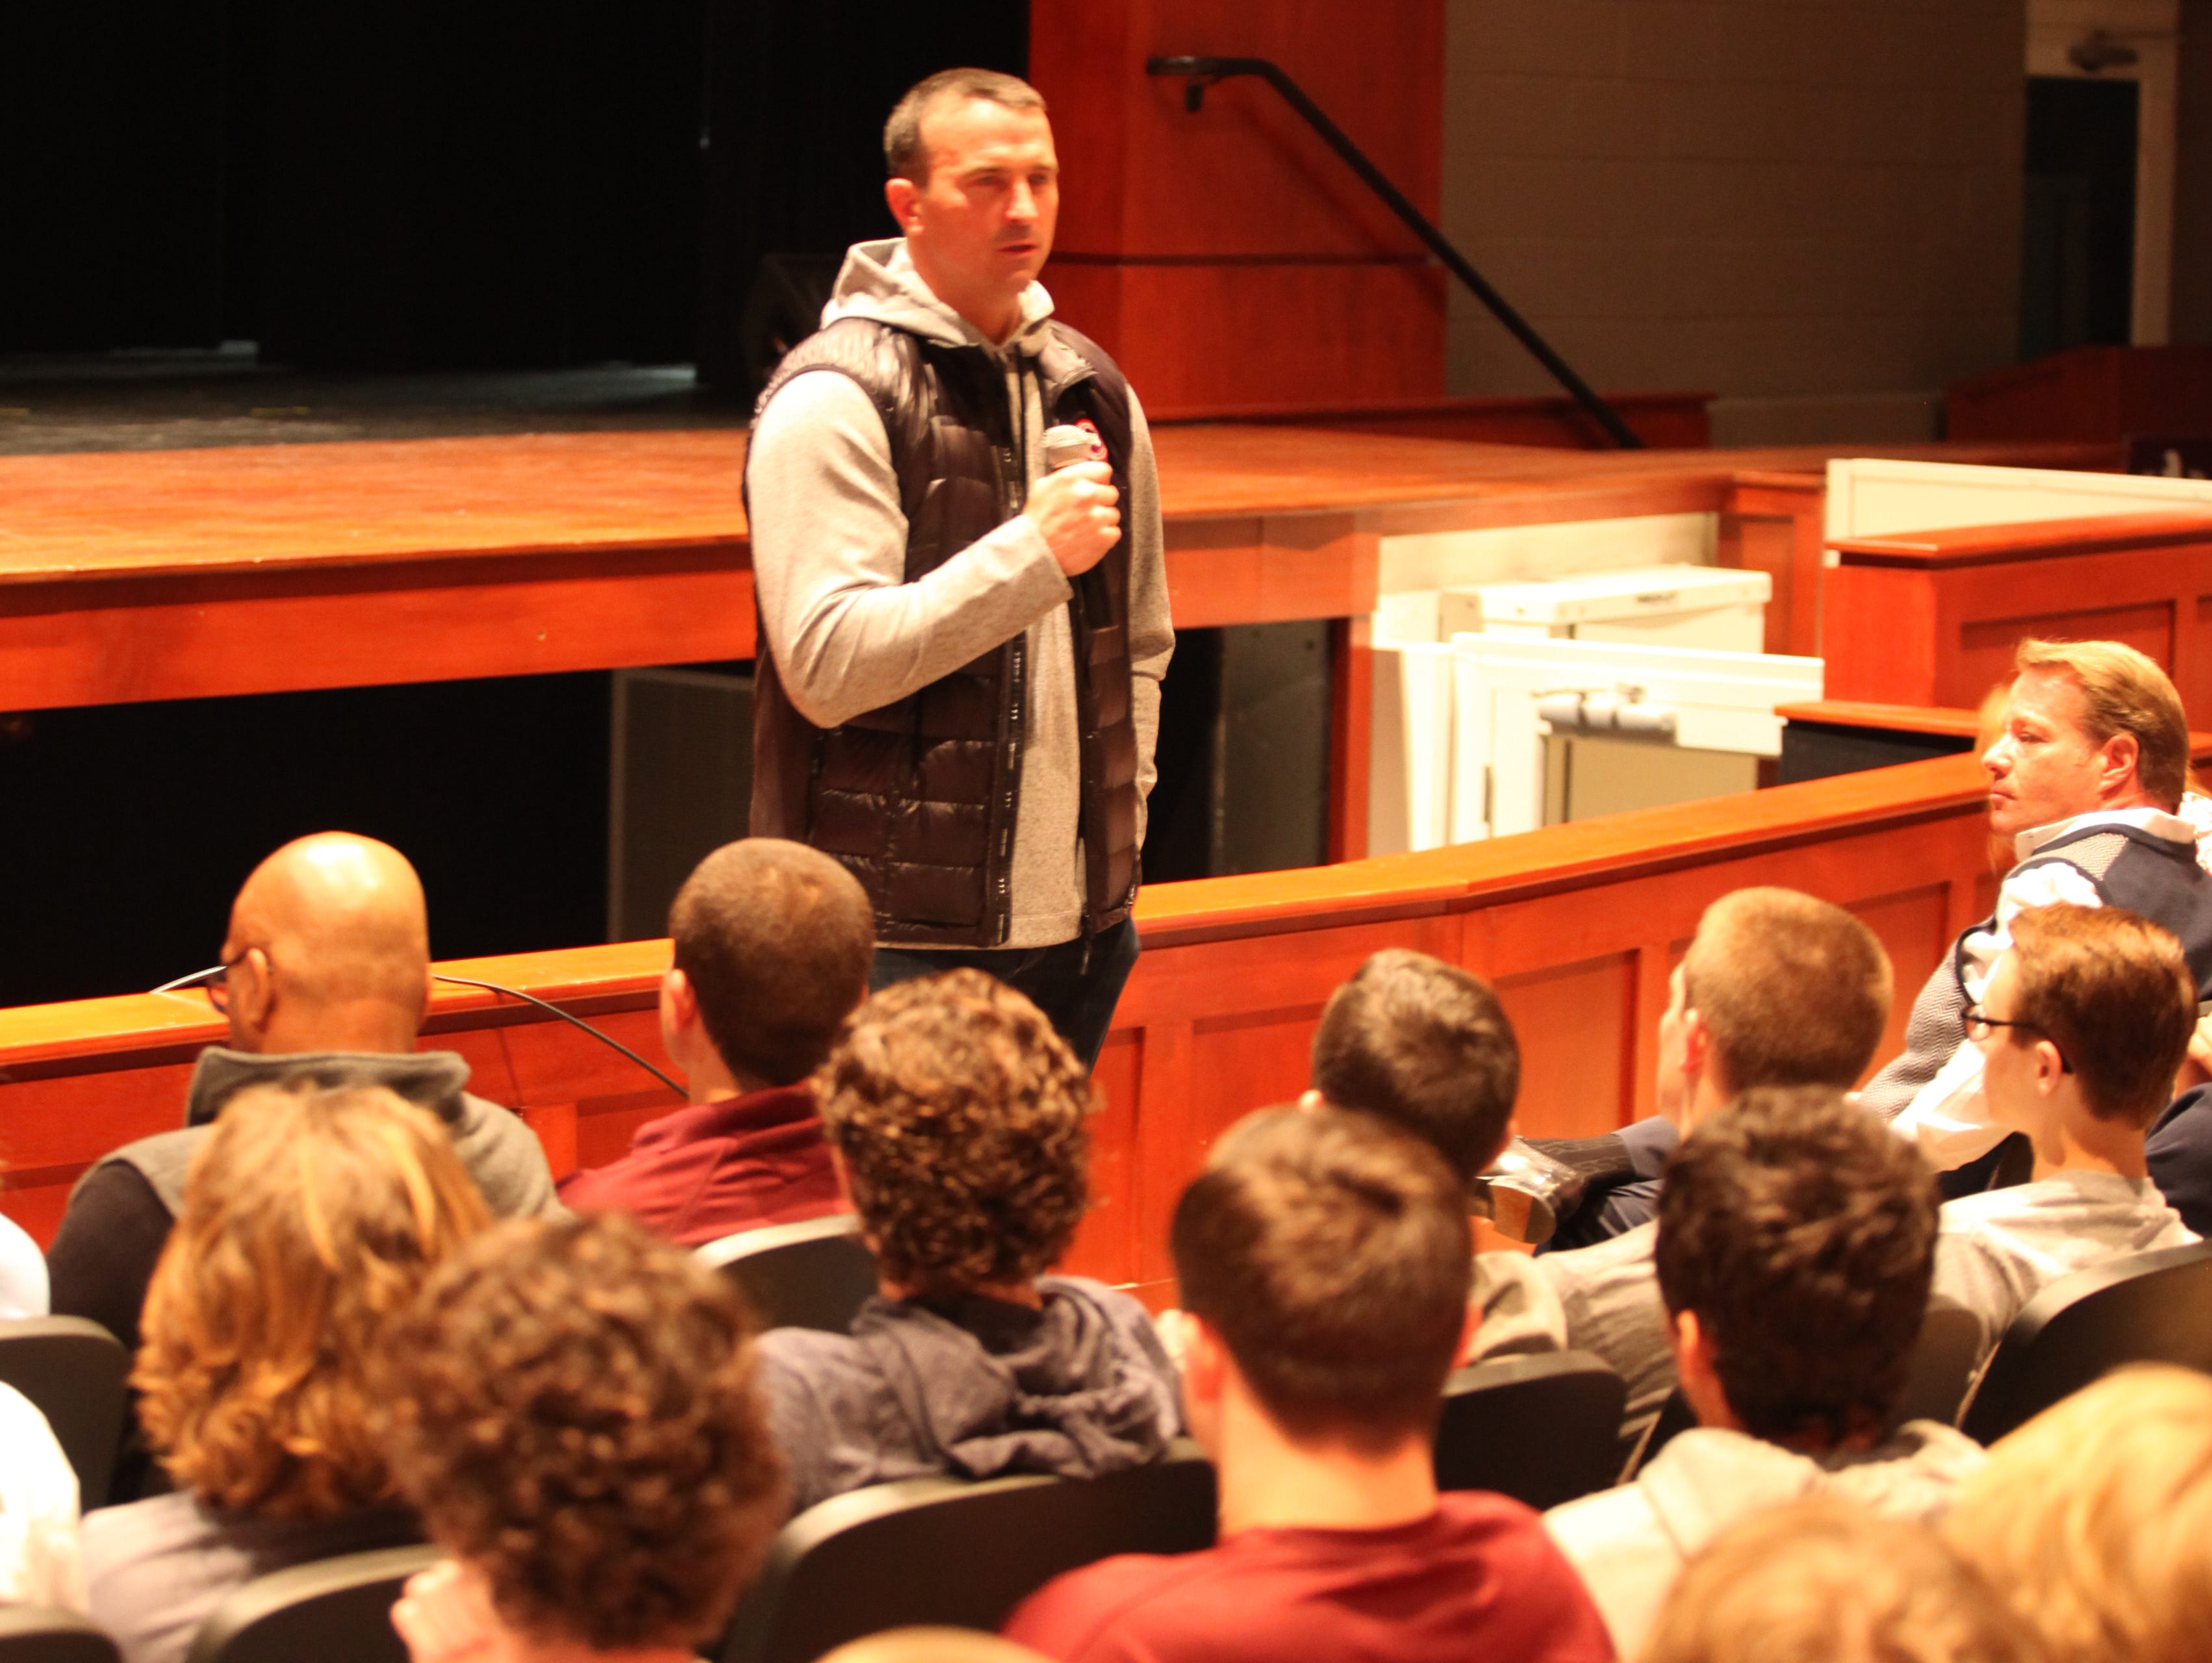 Chris Herren discusses his battle with addiction Tuesday morning to students at Appoquinimink High School. Herren used numerous drugs throughout his basketball career including cocaine, painkillers and heroin. He has been clean for more than seven years now.